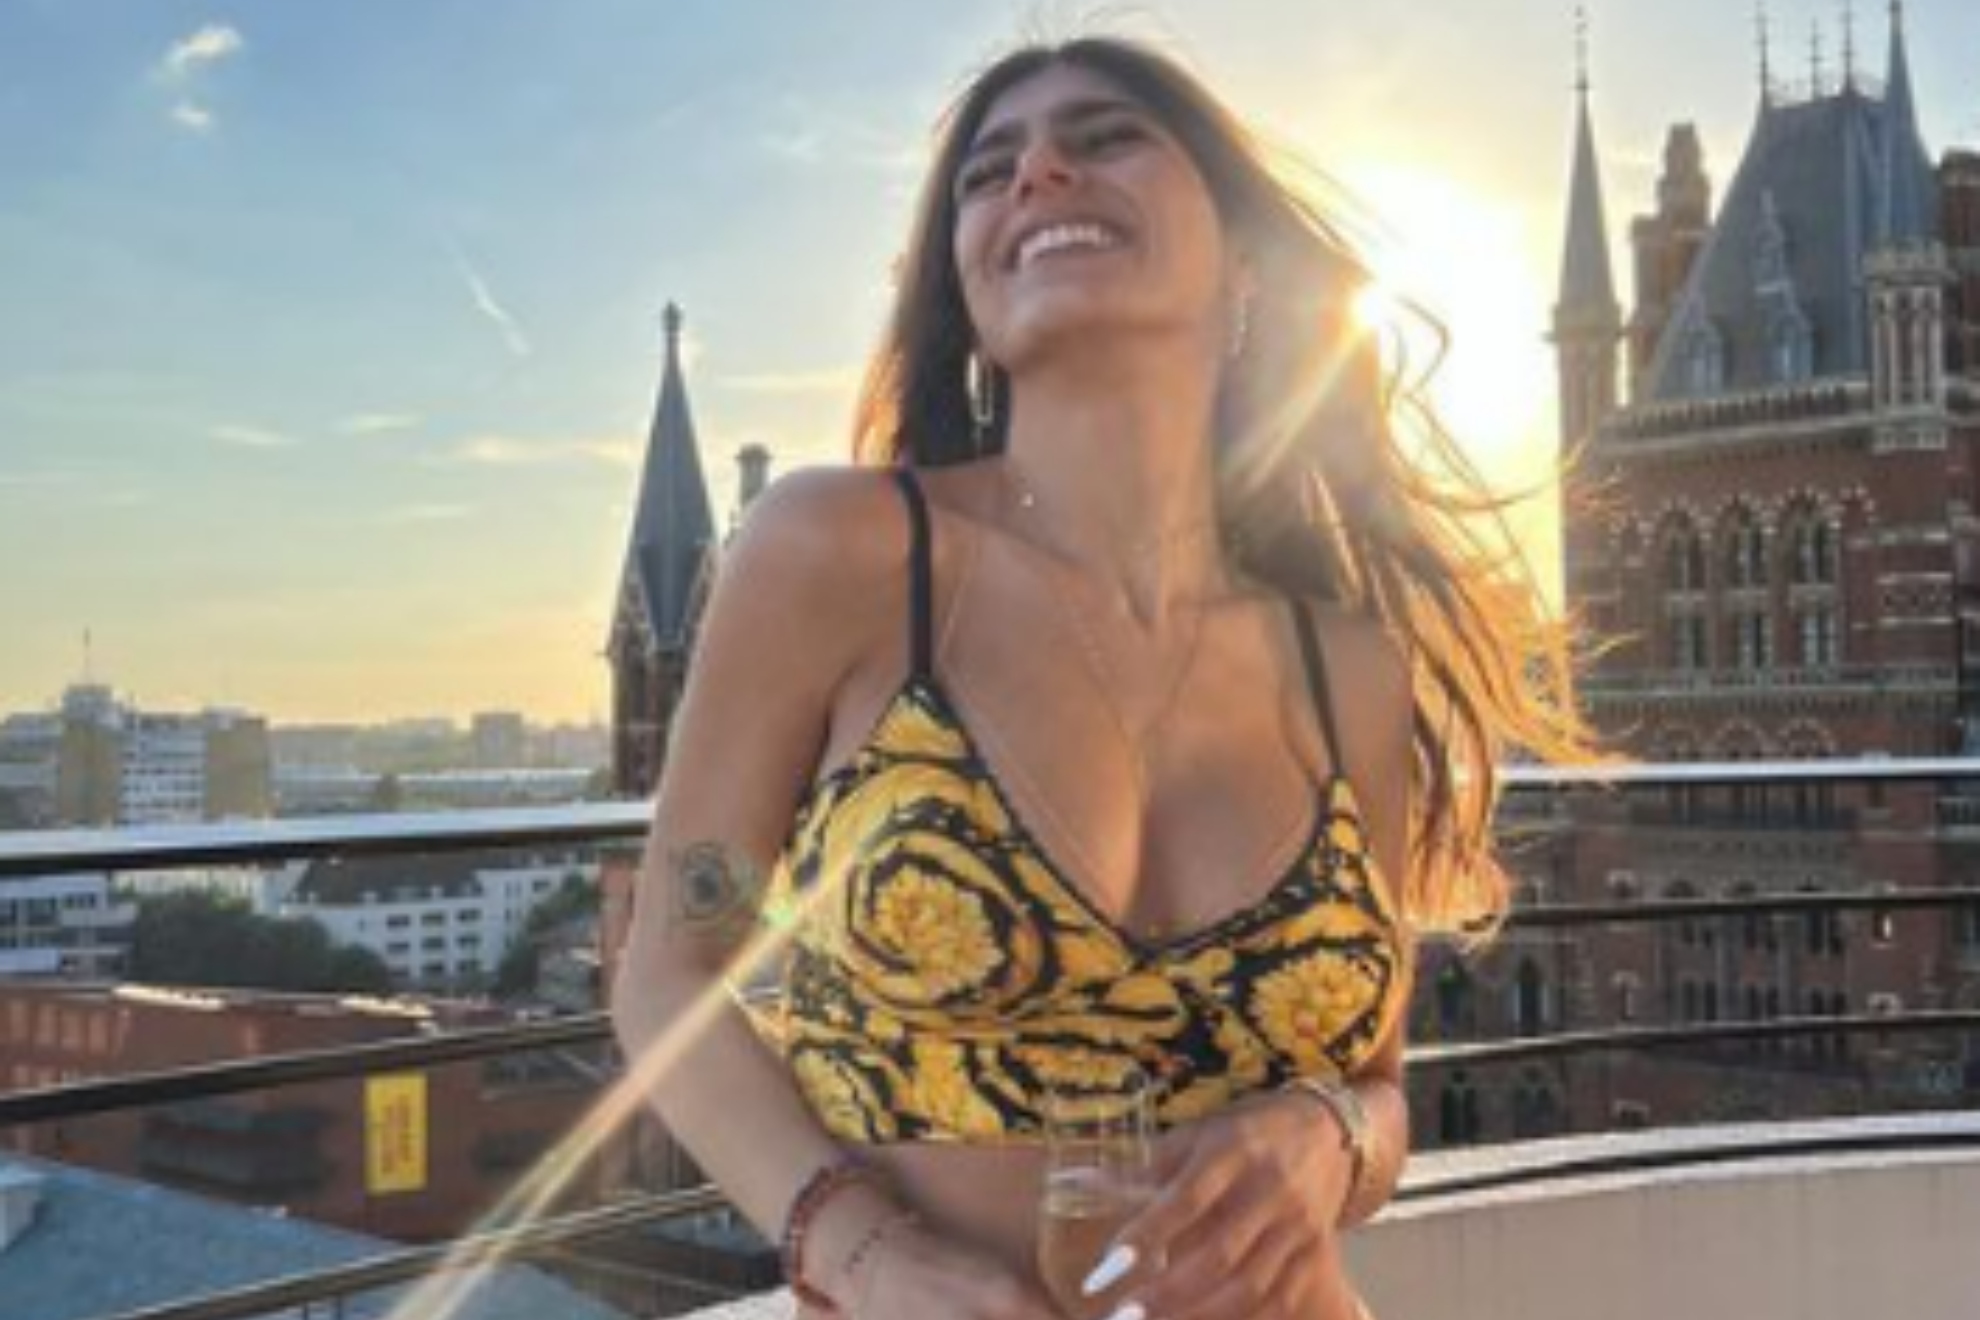 Sex Of Robert Sandbery - How much did Mia Khalifa earn in her active years as a porn actress? | Marca